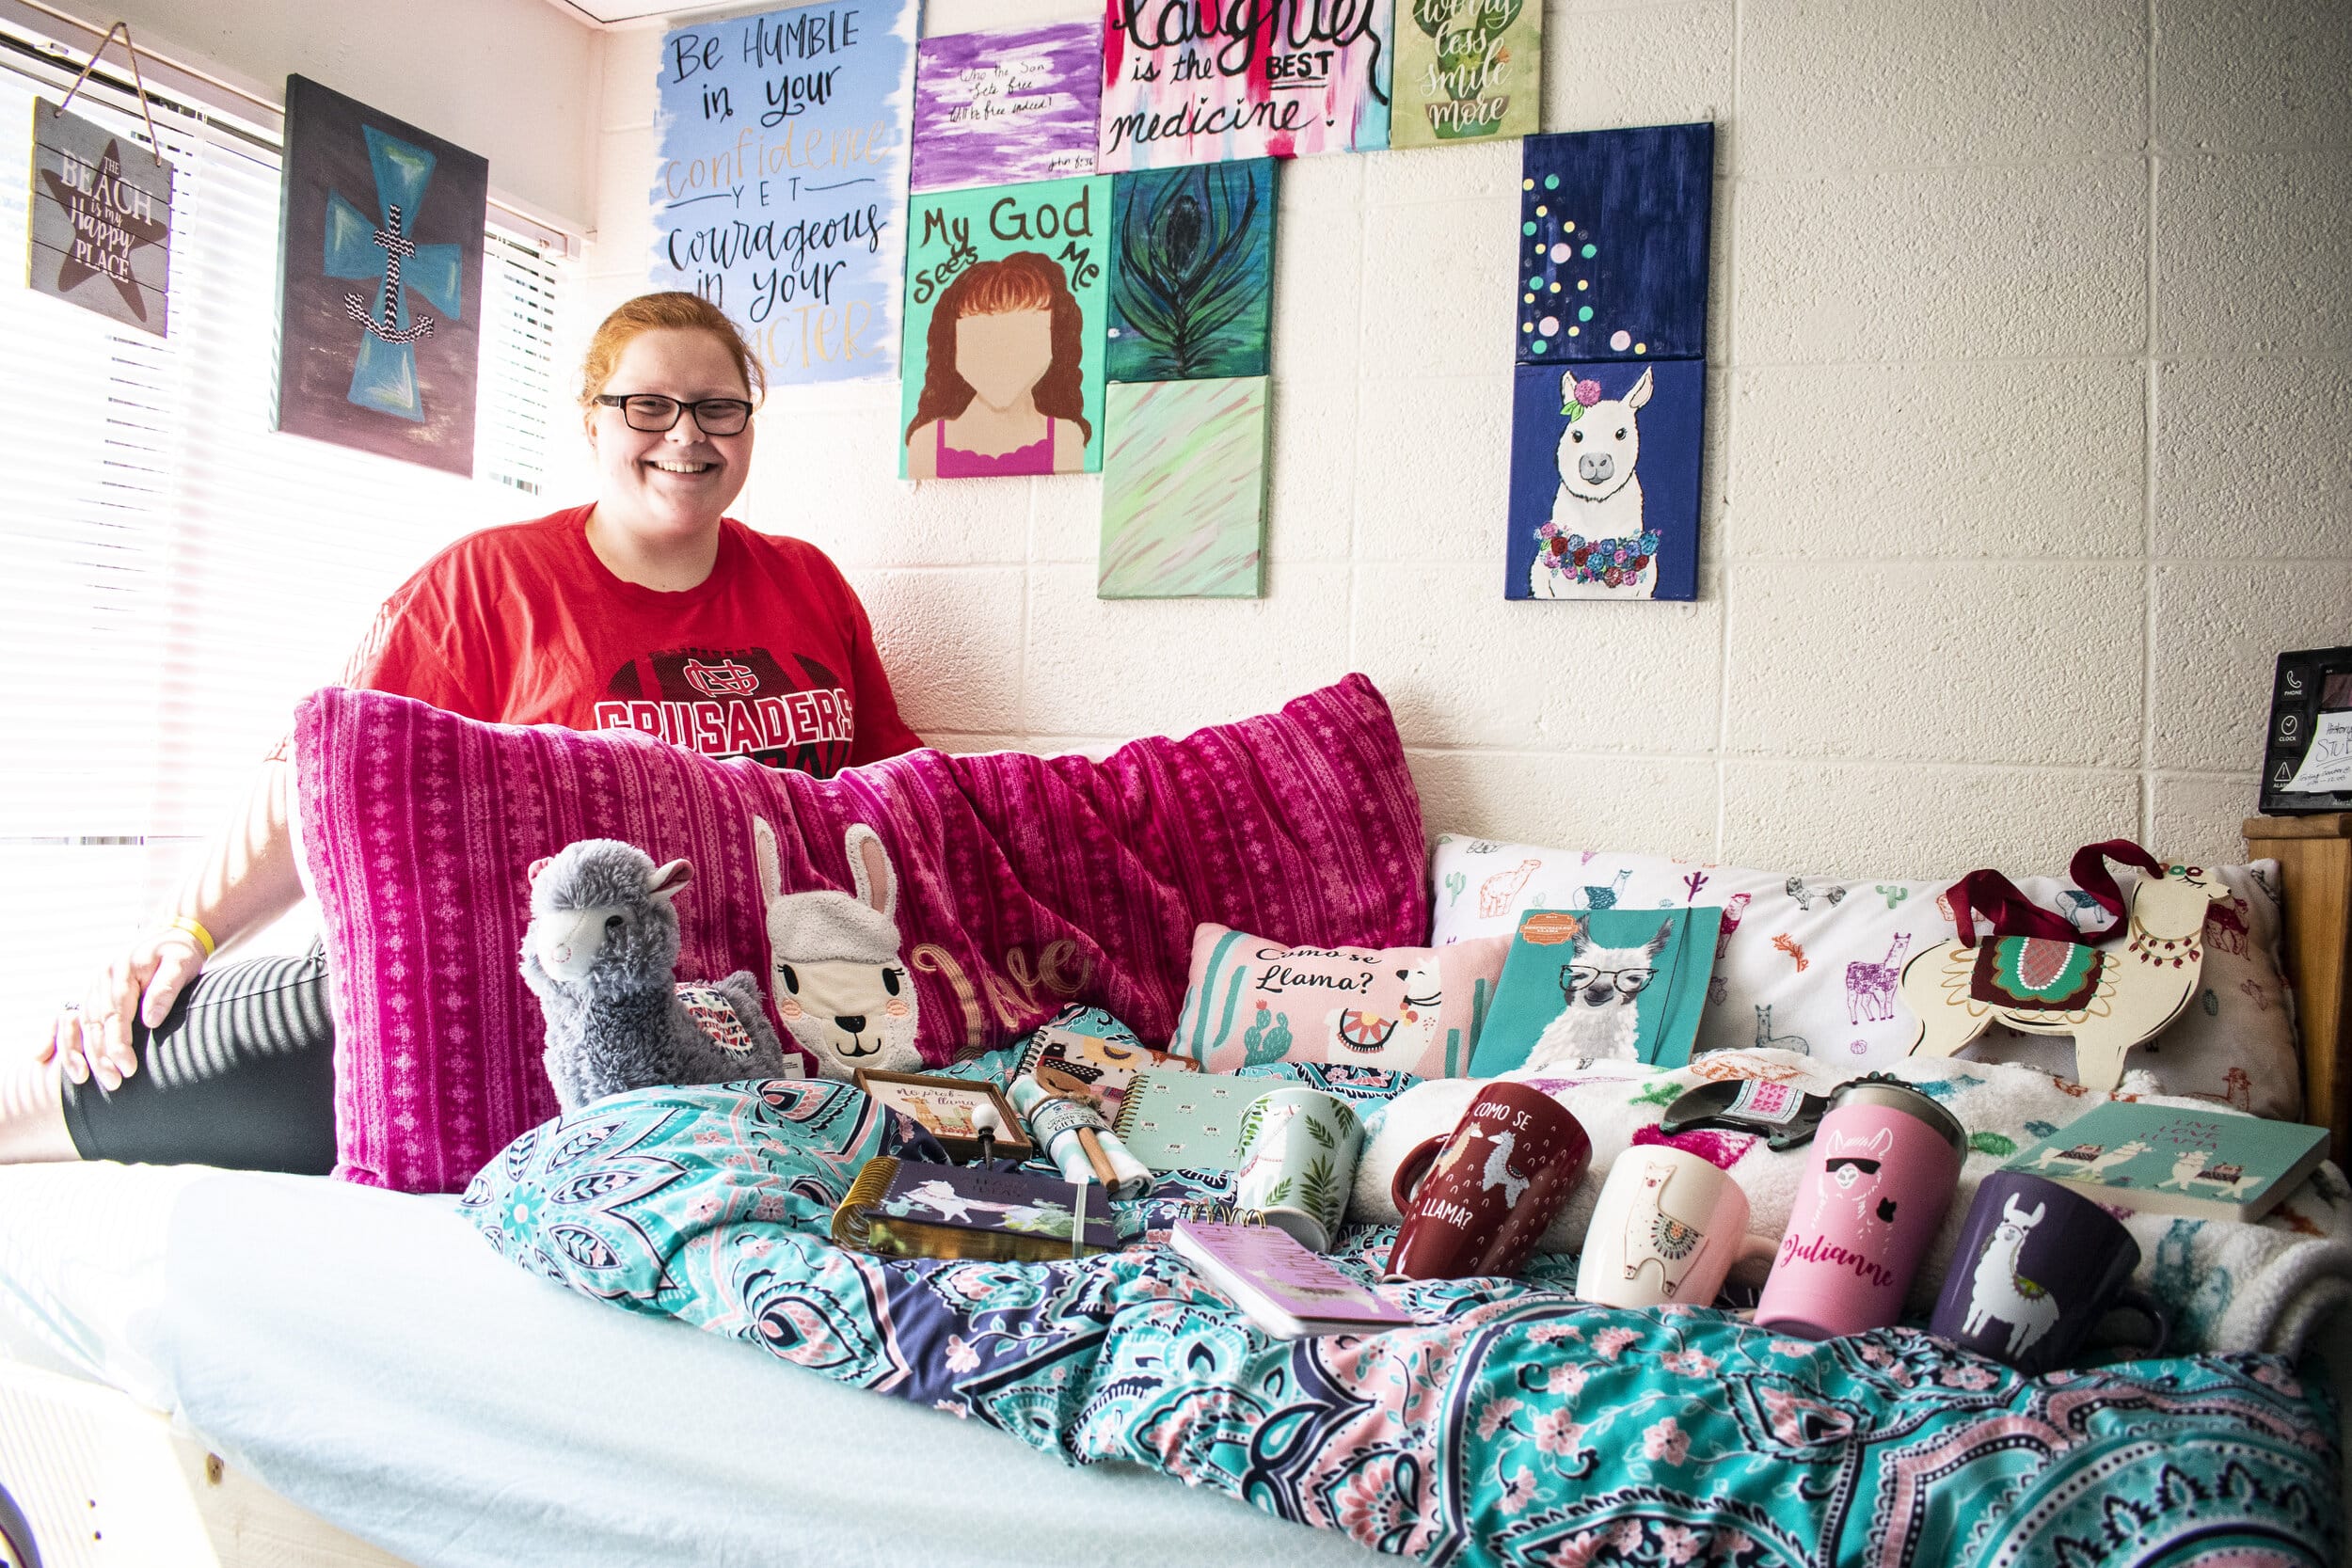 Sophomore Julianne Edmonds shows off her collection of llama items.